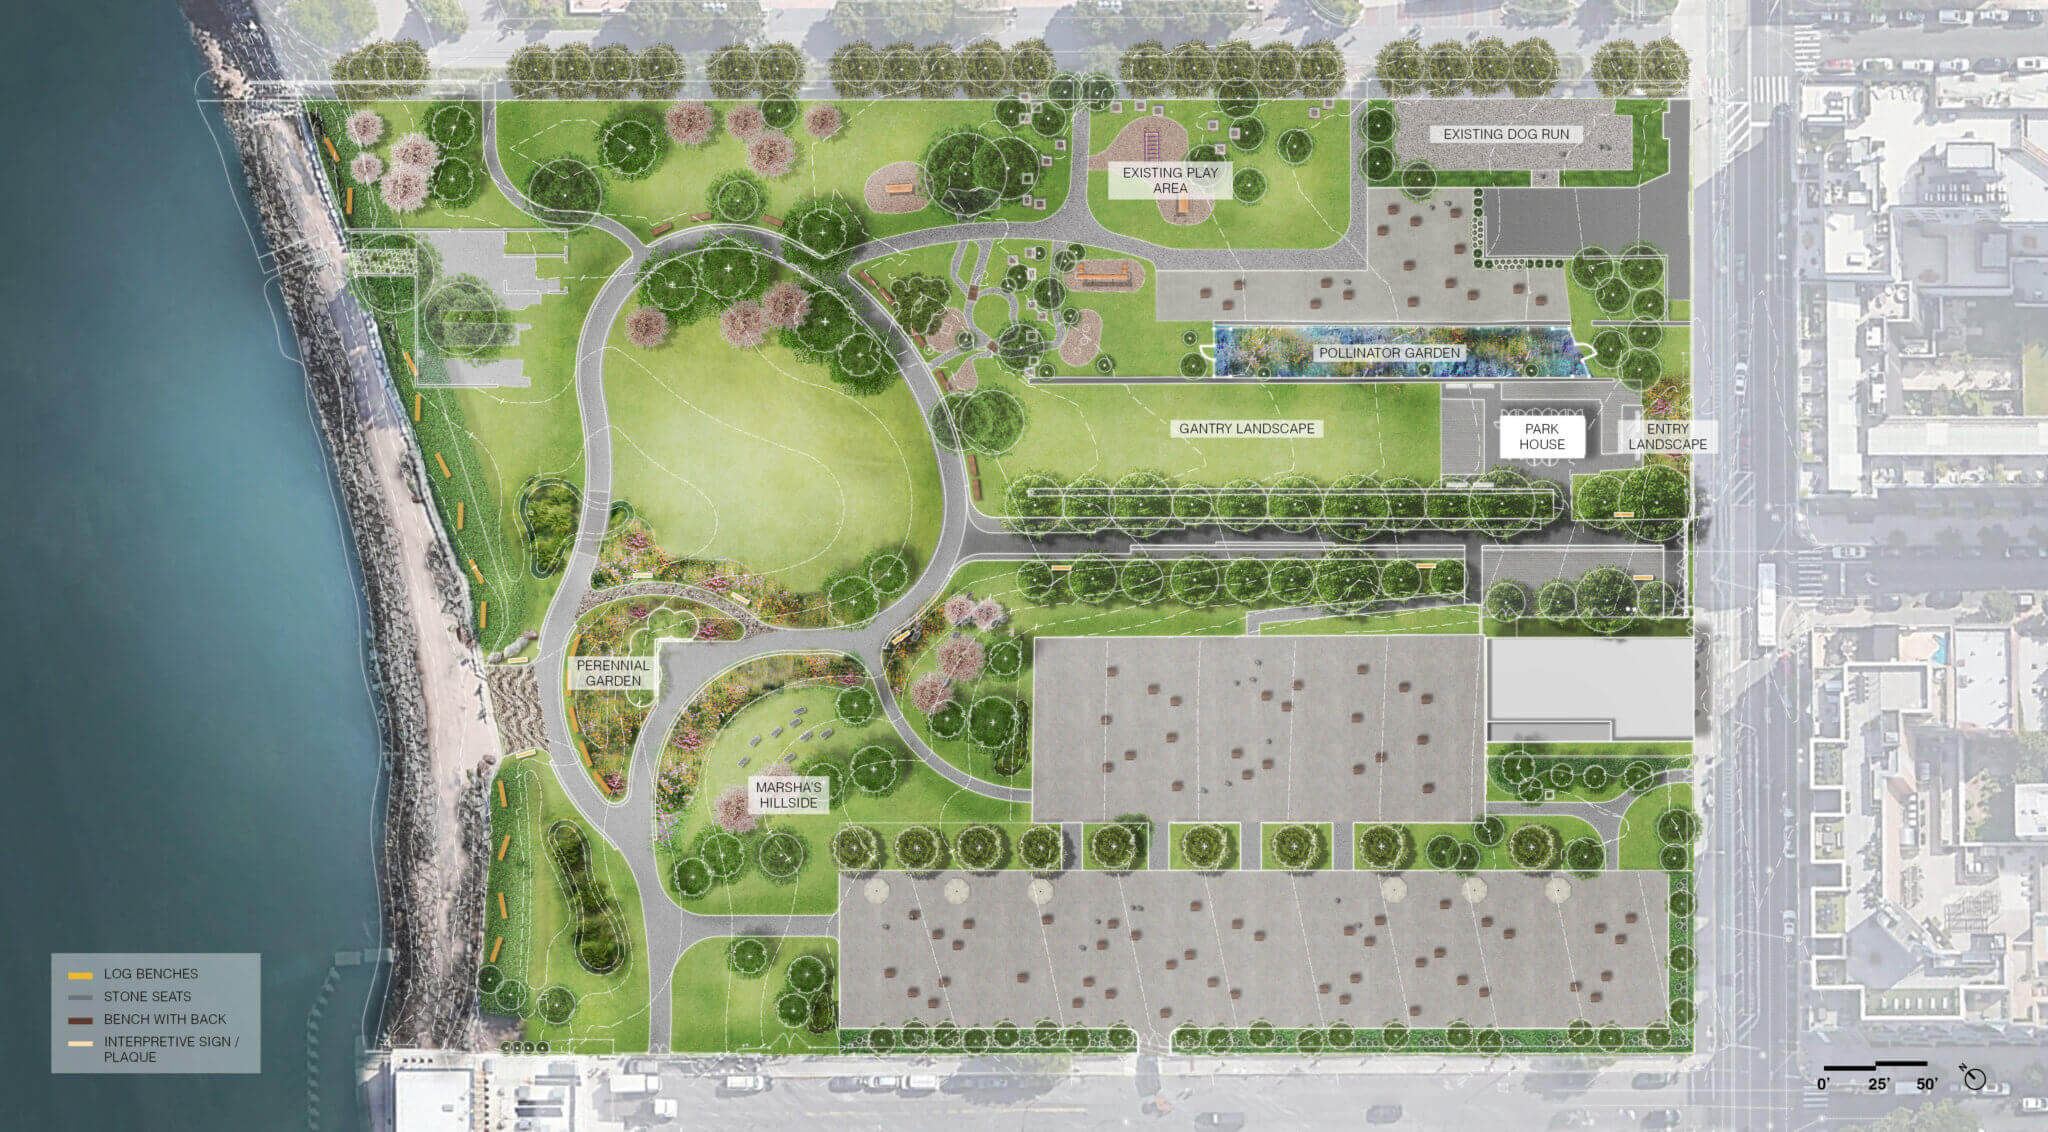 A site plan for Marsha P. Johnson State Park